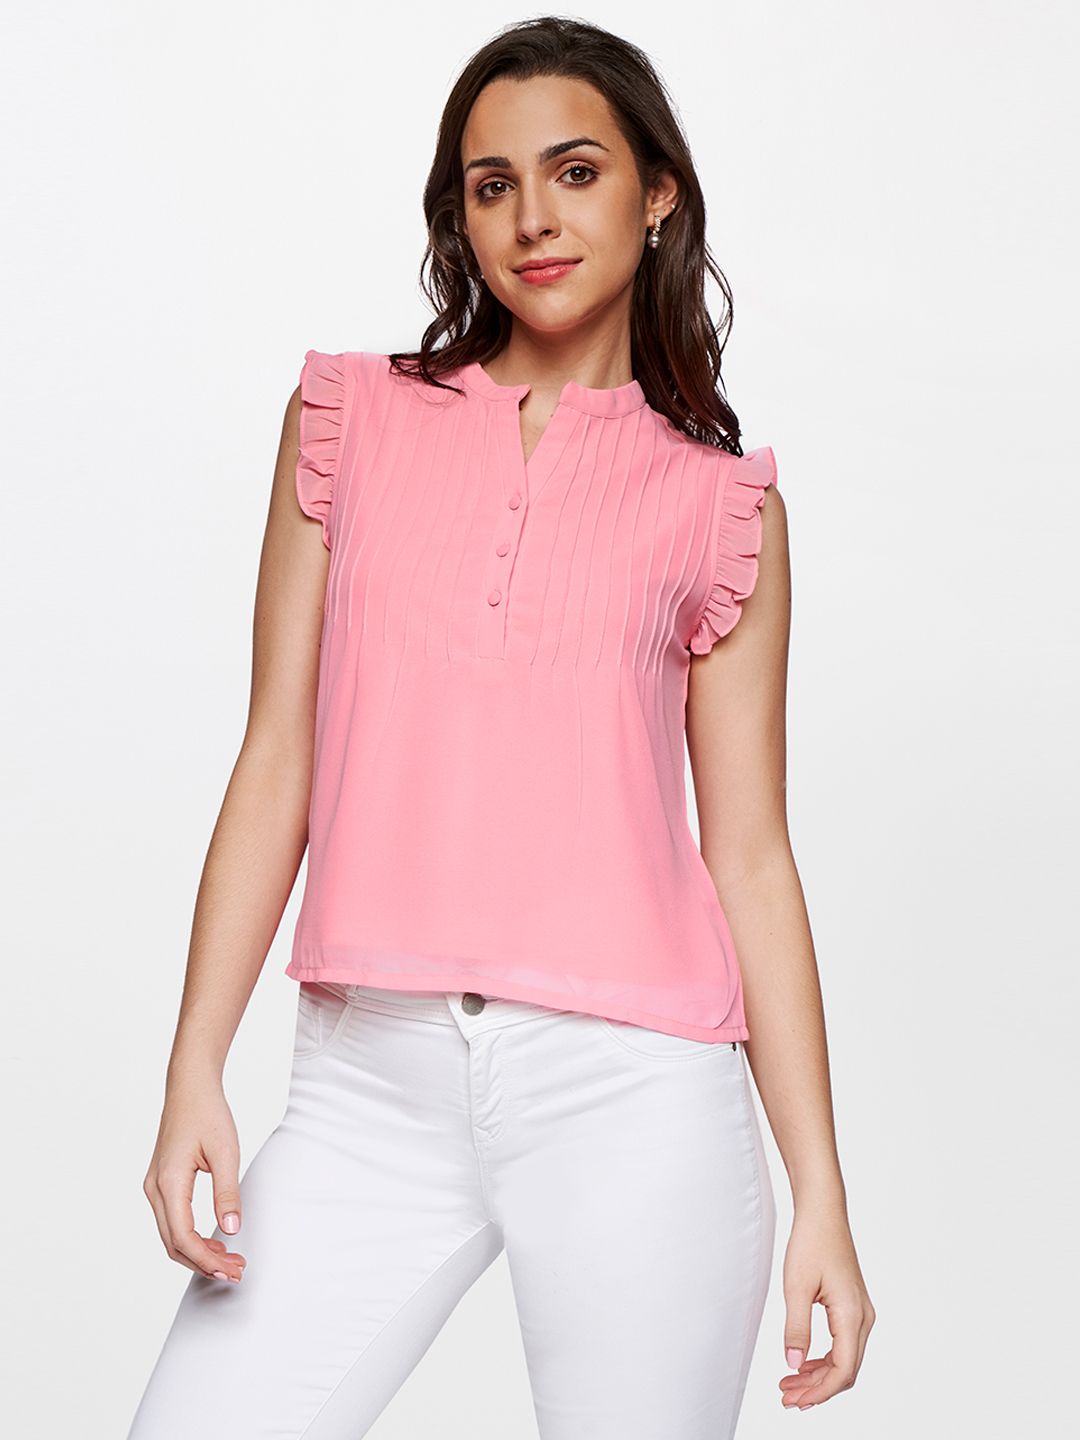 AND Pleated Mandarin Collar Top Price in India